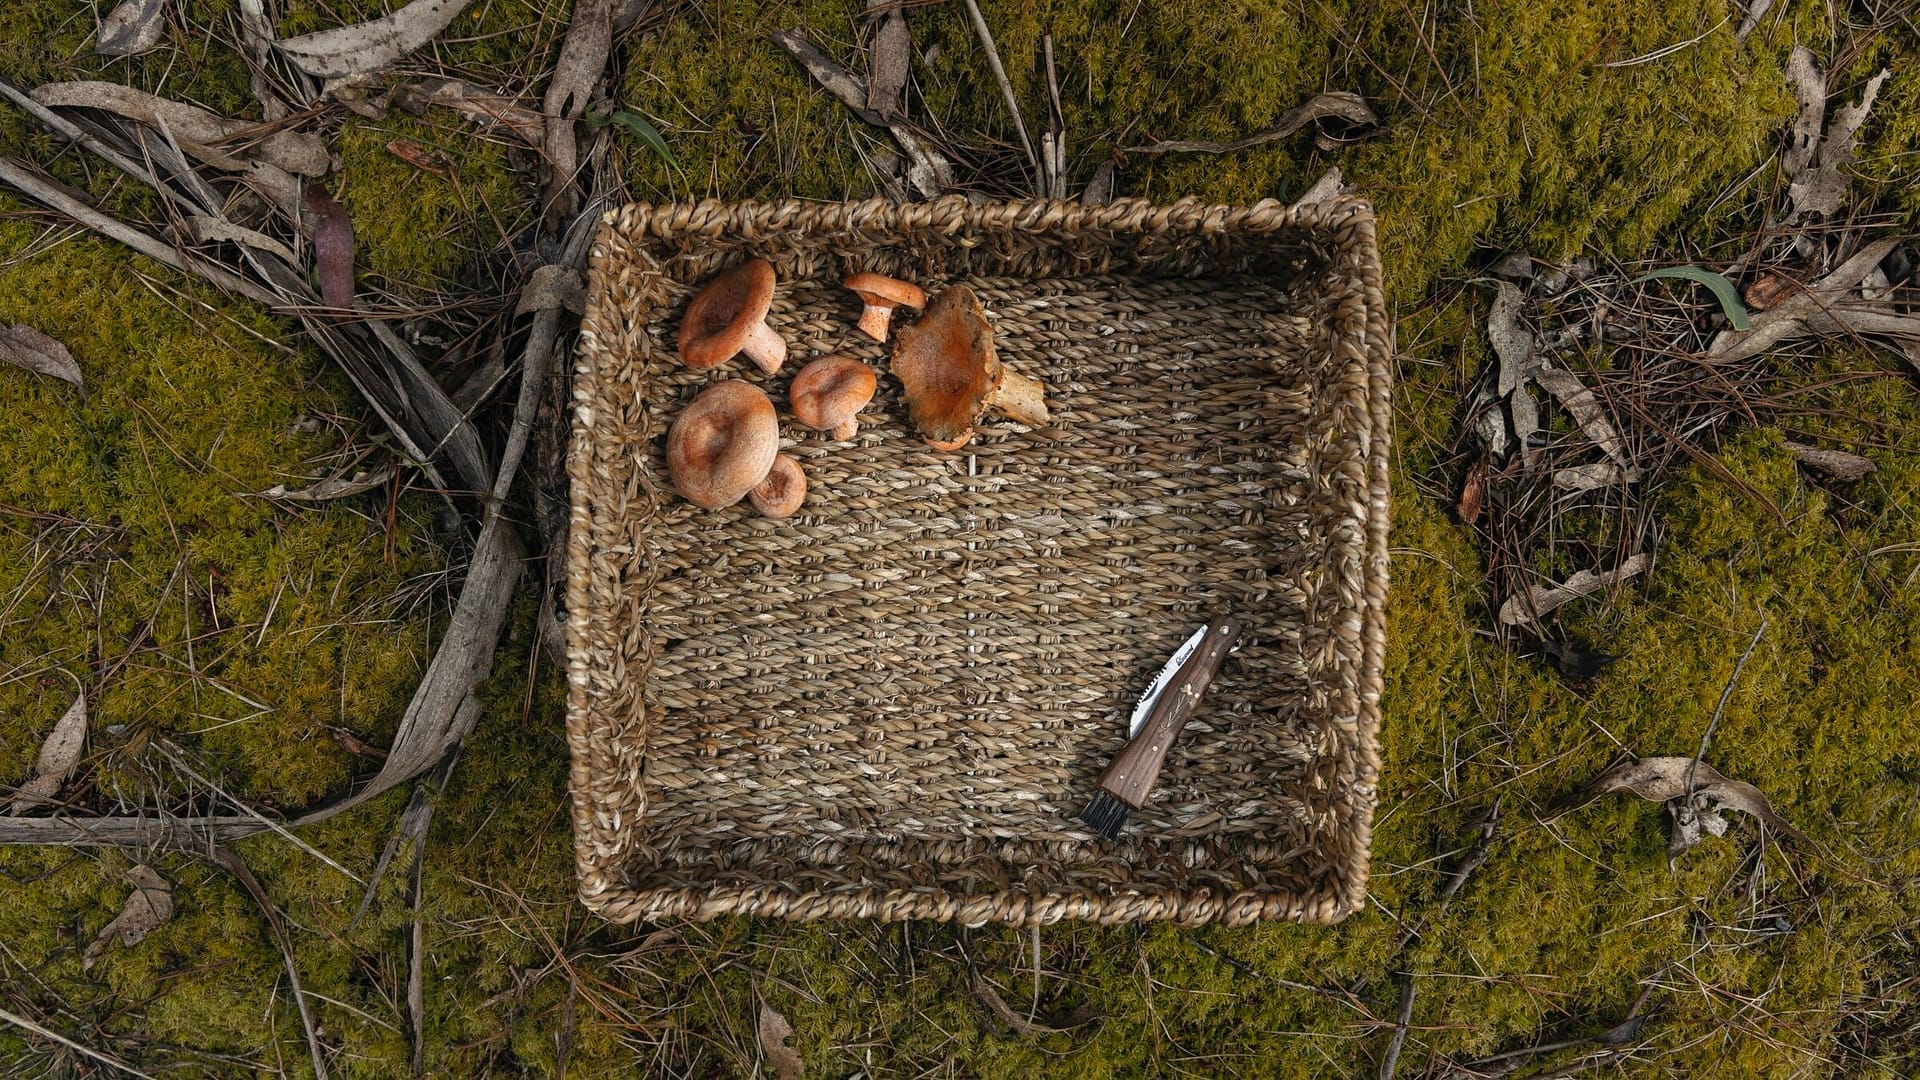 Image: a mushroom foraging trip -- basket with a knife and some found mushrooms